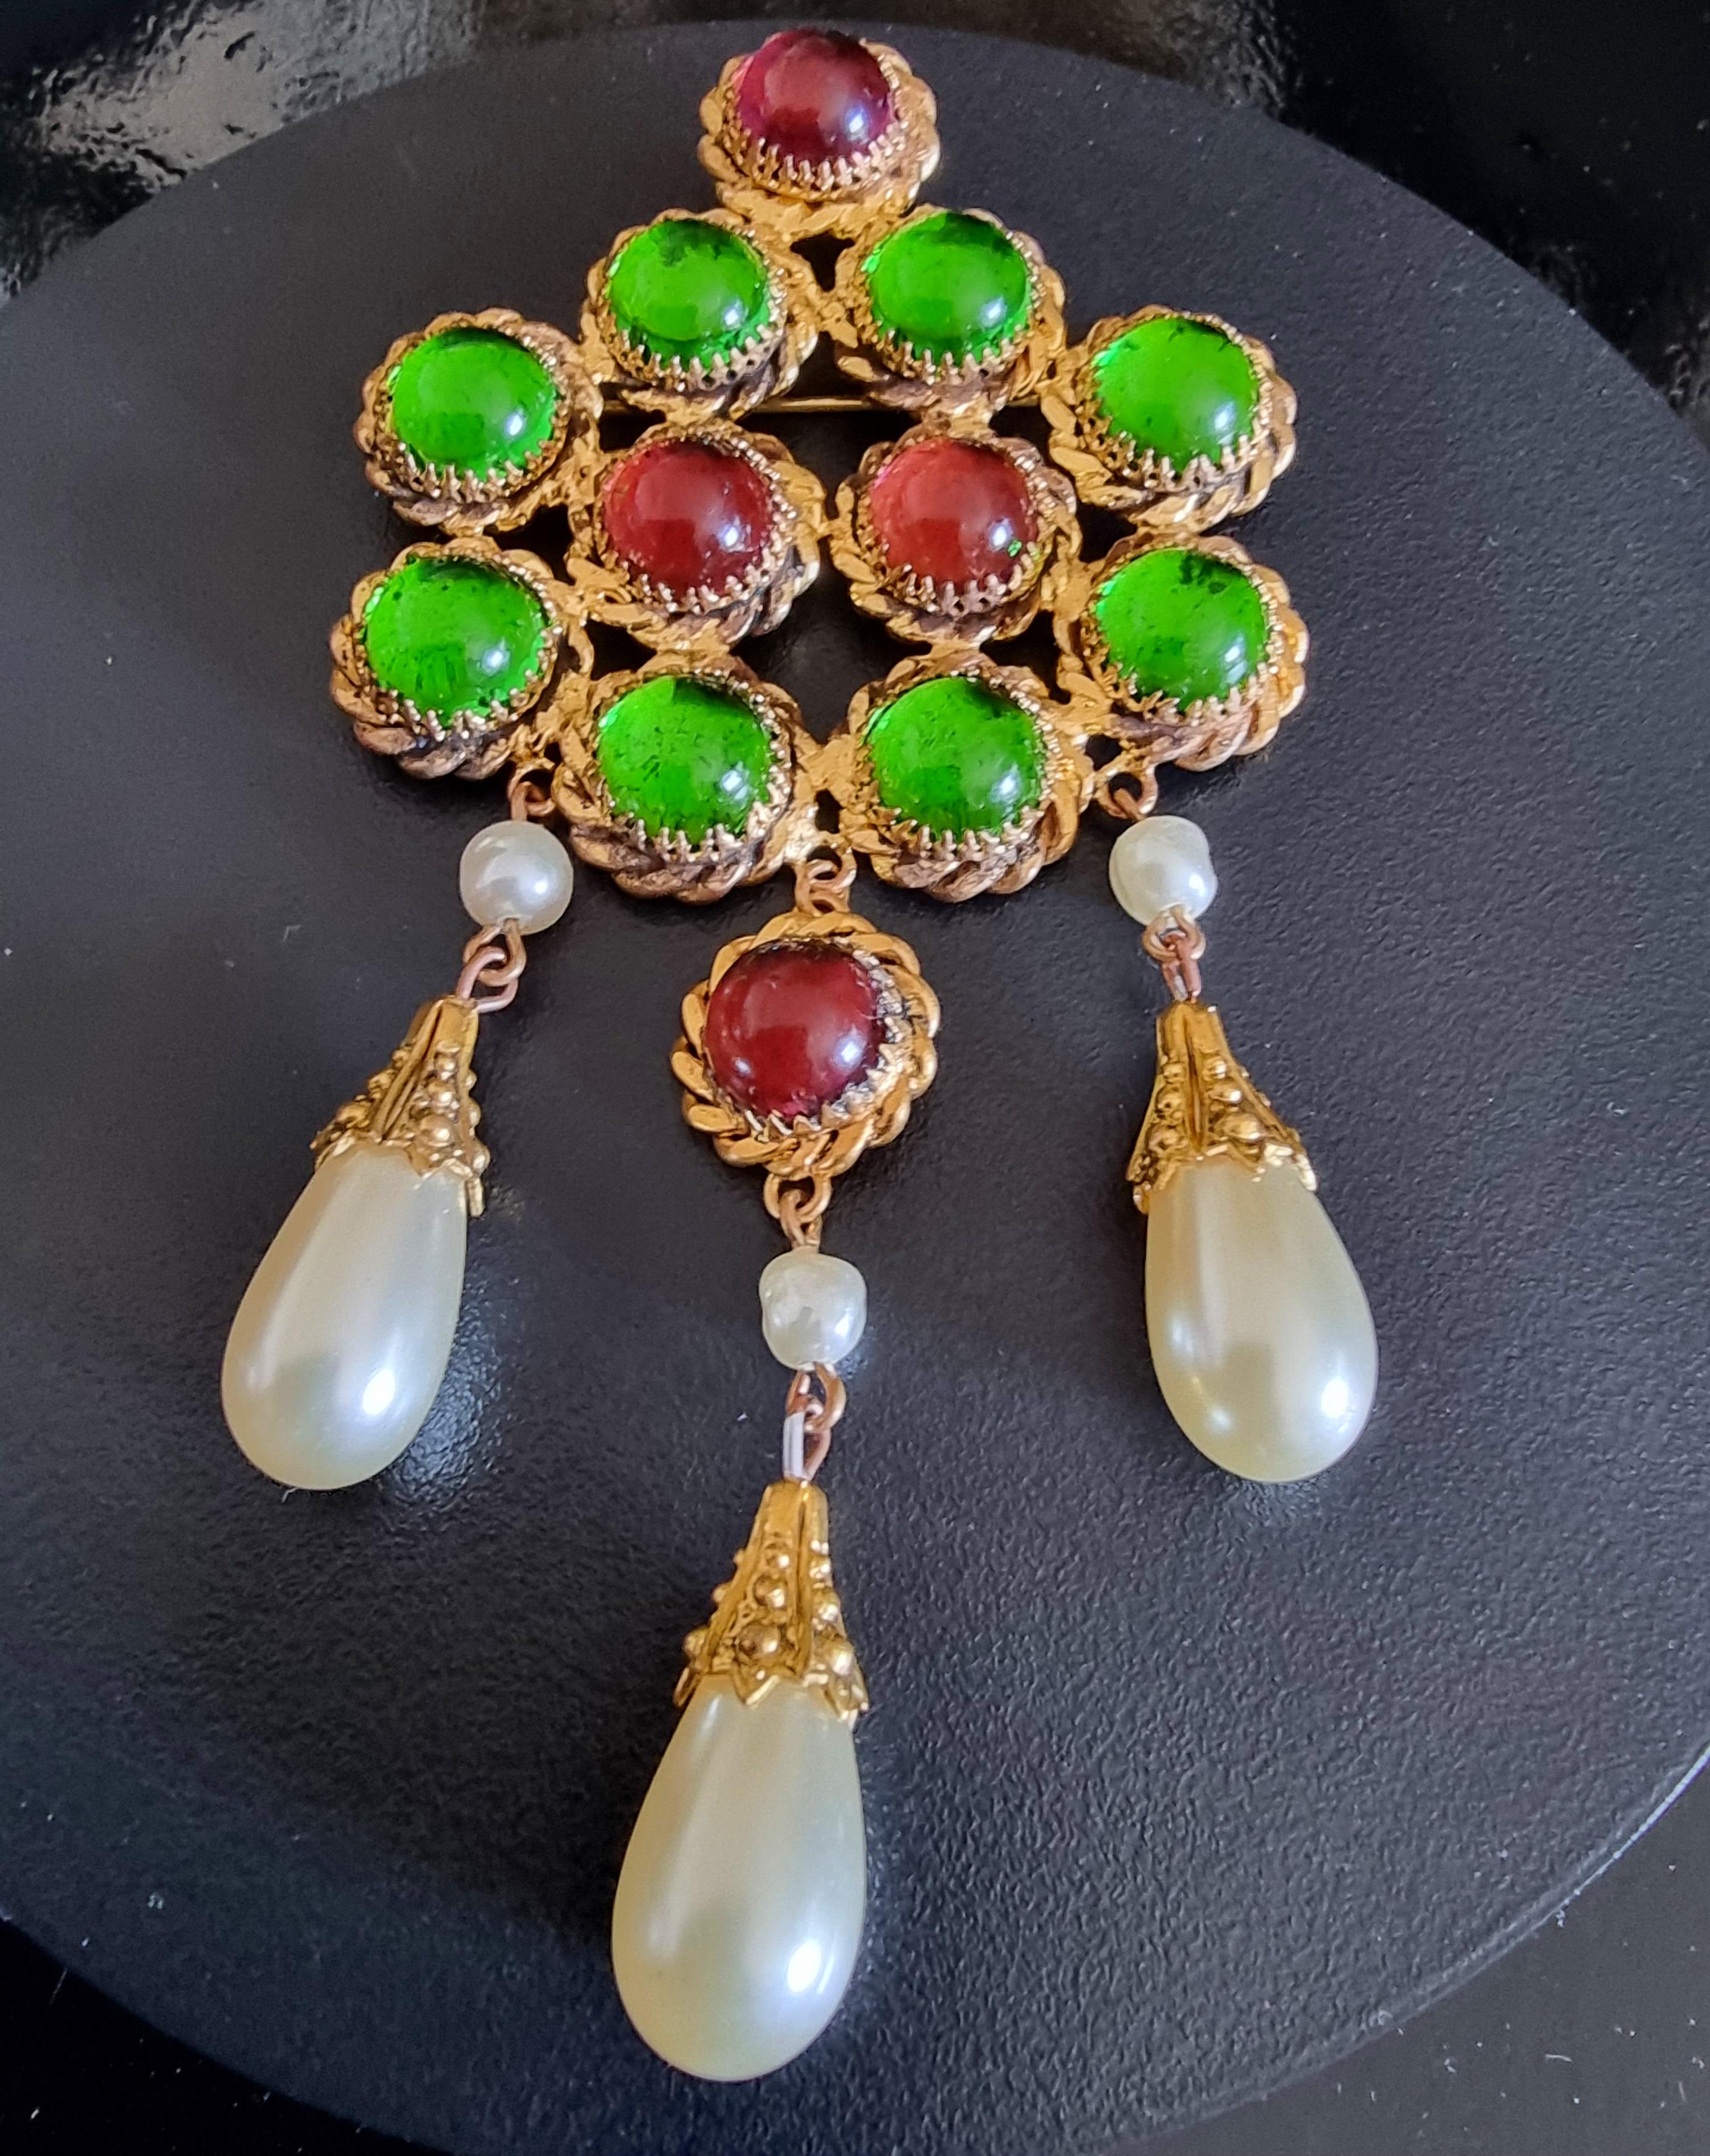 Magnificent large old brooch,
vintage,
by Maison GRIPOIX,
very rare model, collector's item,
an extraordinary work that is no longer produced by the defunct Maison Gripoix,
height 12.5 cm, width 6 cm, weight 53 g,,
clasp works perfectly,
good